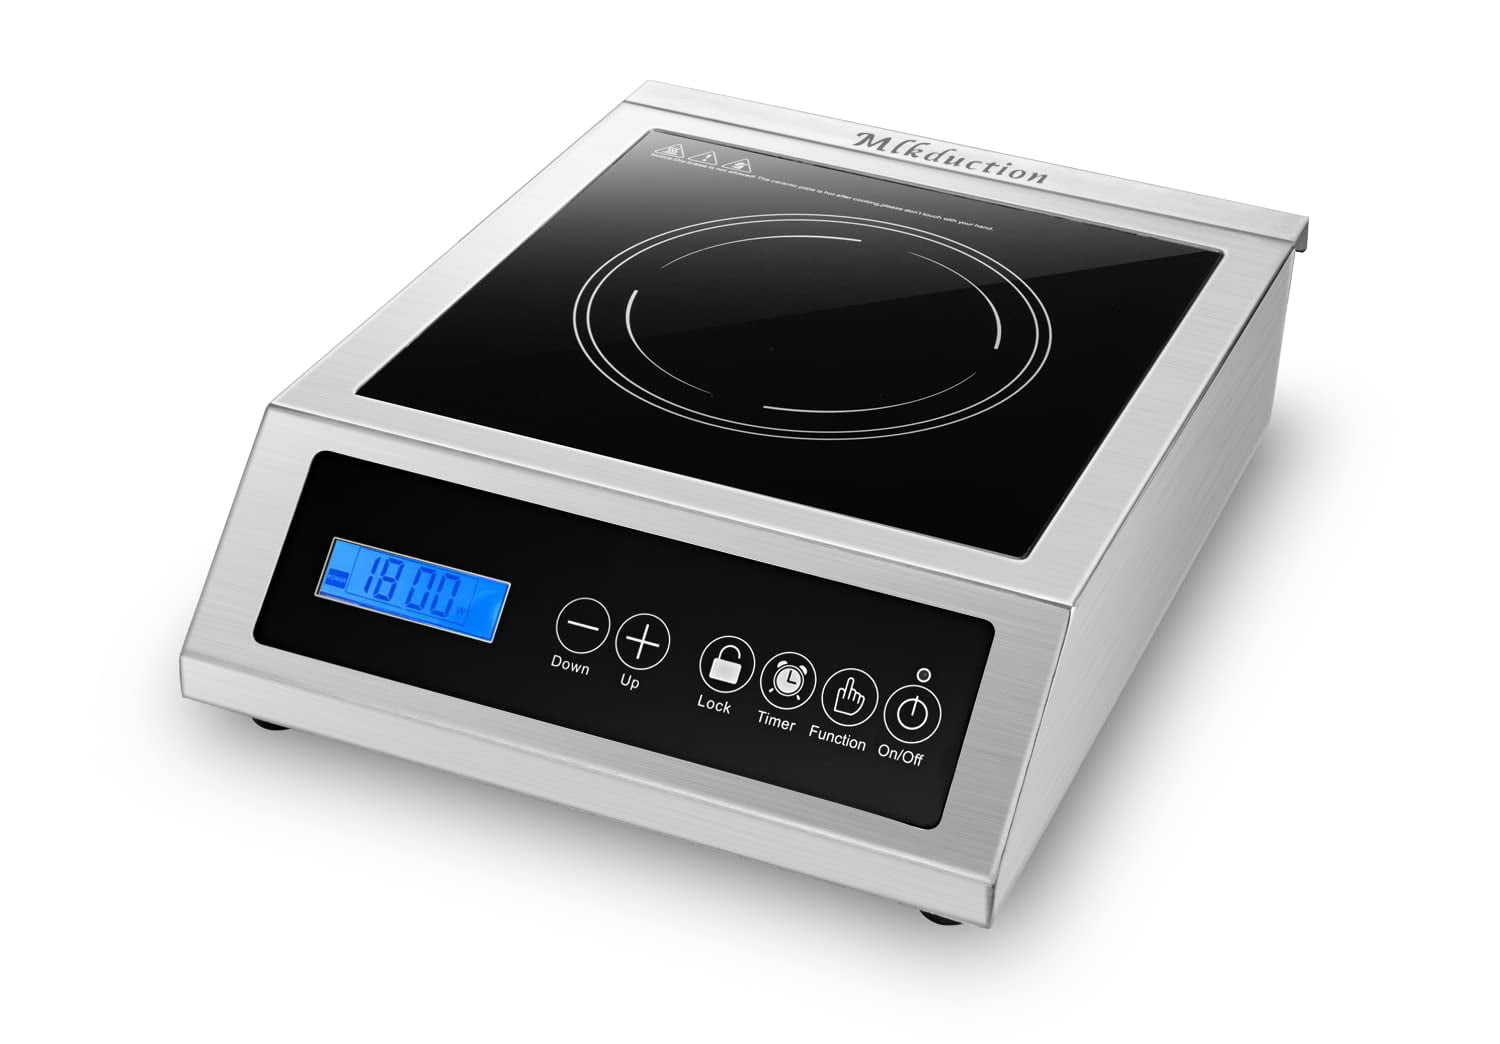 Professional induction hobs : Professional induction hob “special